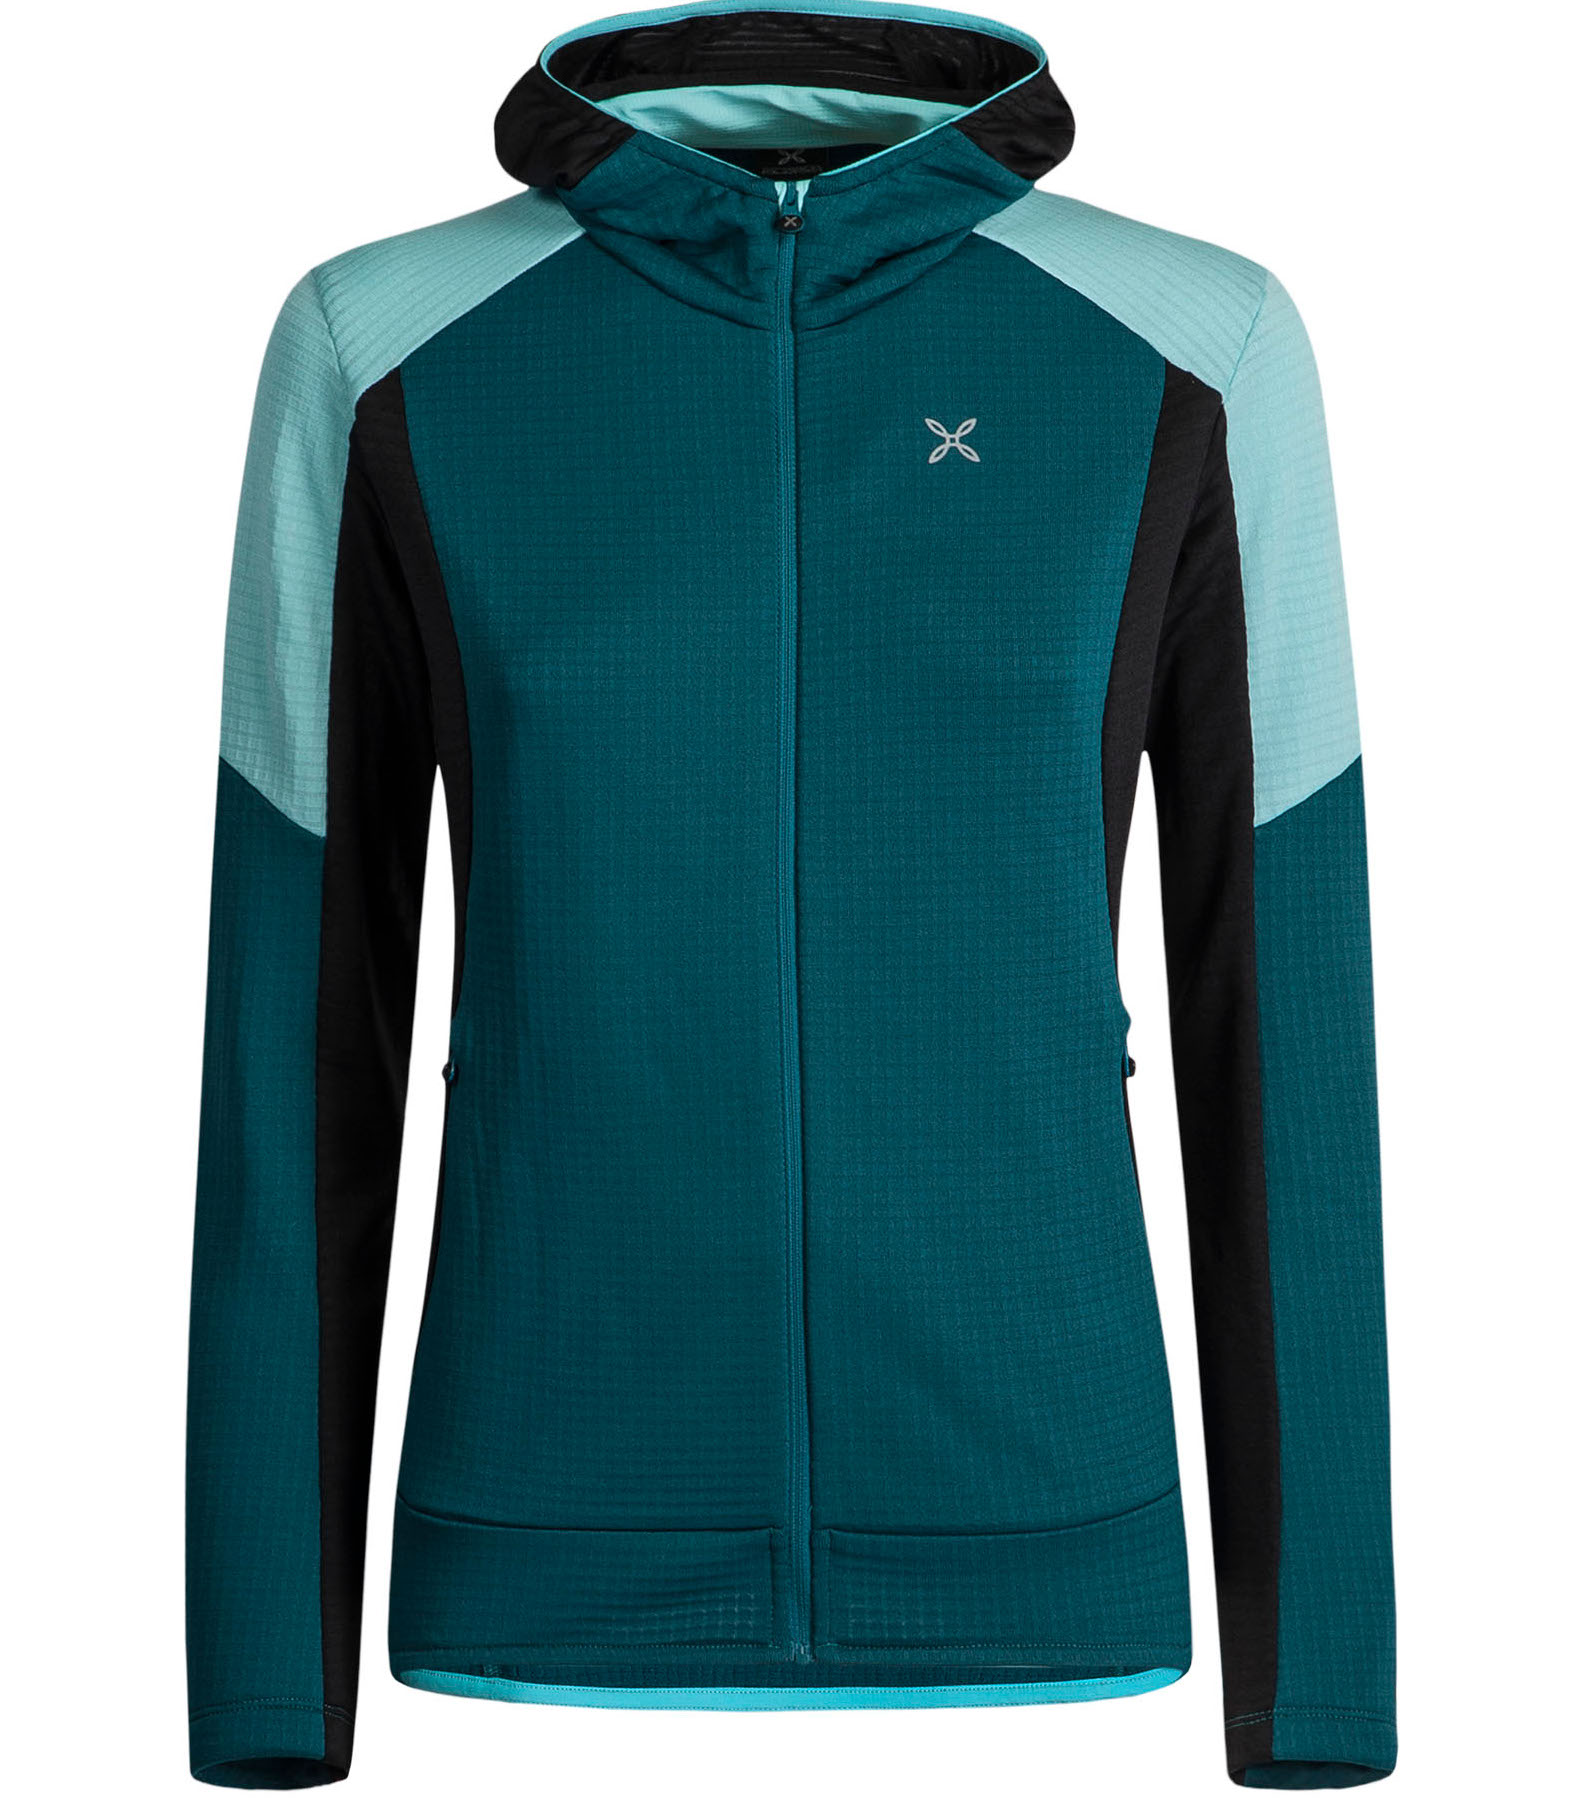 Picture of Montura Stretch Color Hoody Jacket Women - baltic blue/icy blue 5129